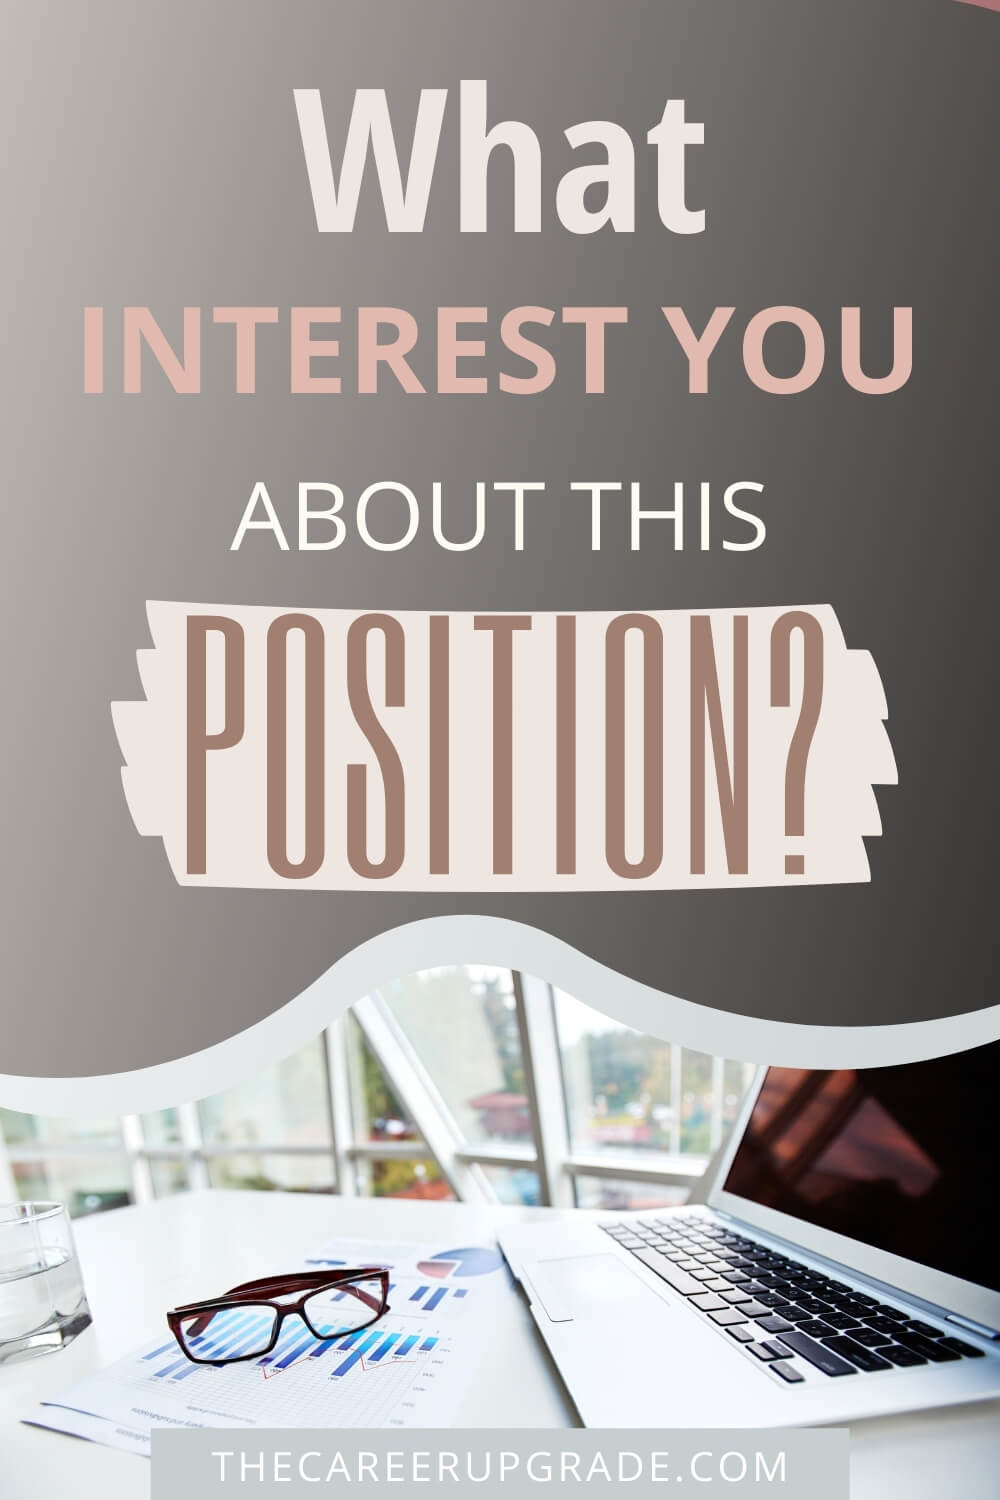 How to answer the interview question What interests you about this position?